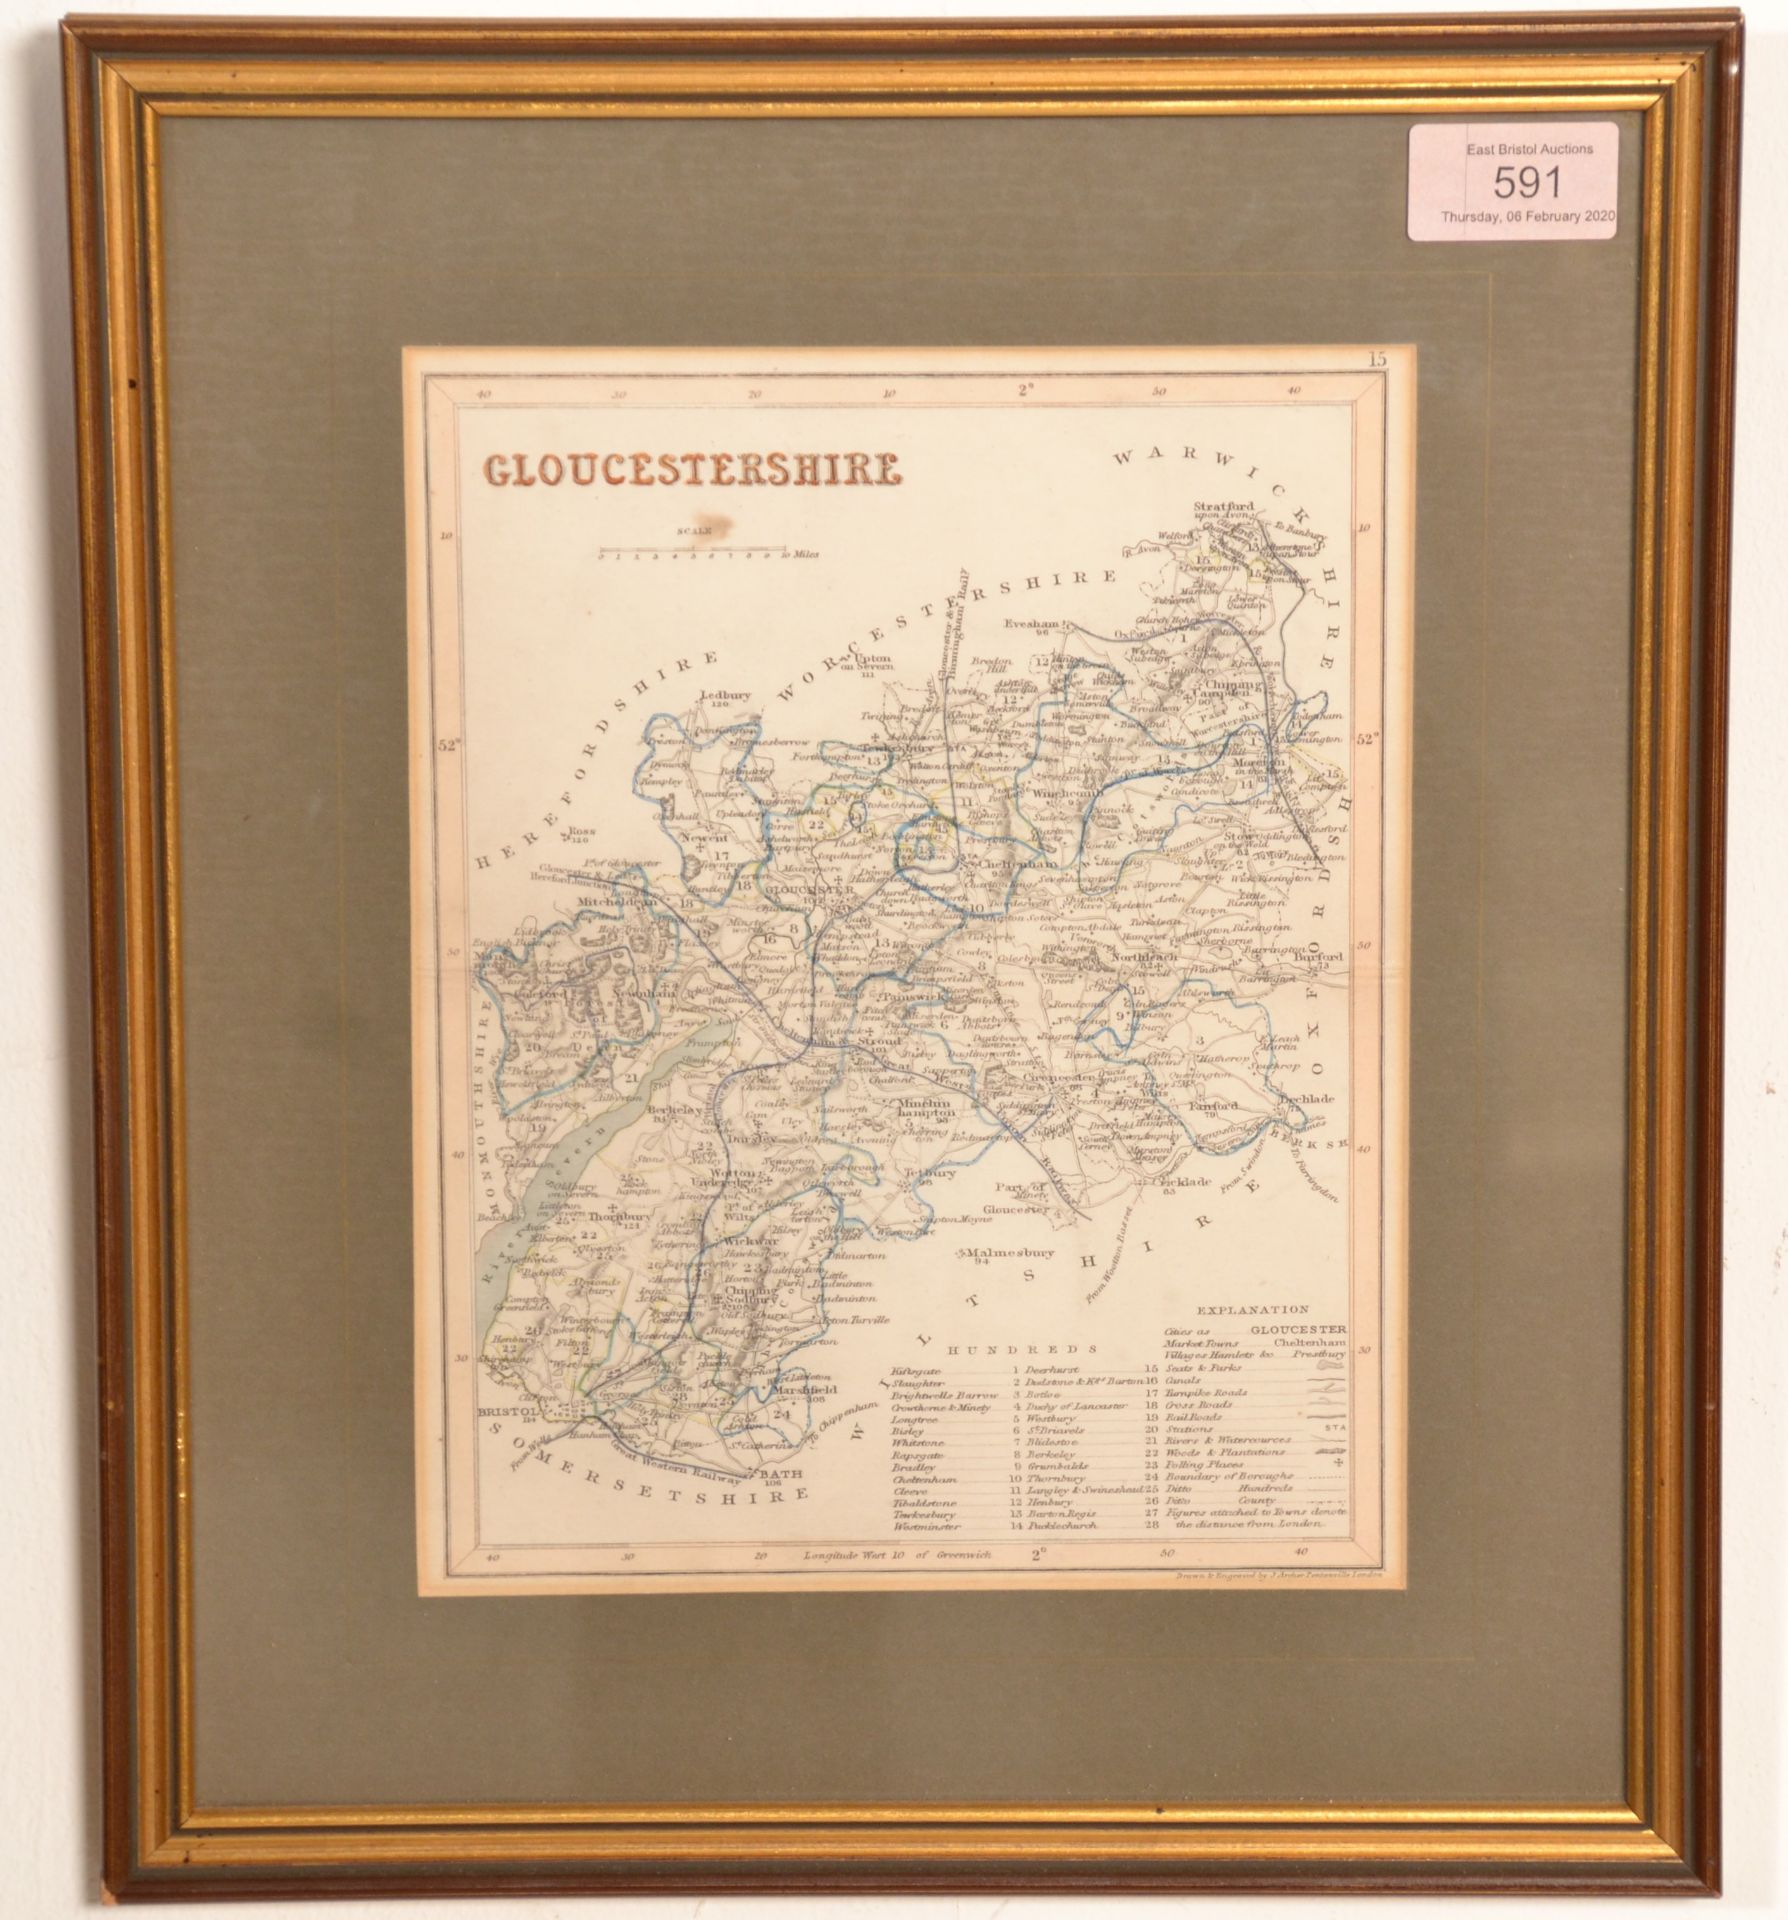 A 19th Century drawn & engraved map of Gloucestershire by J Archer Pentonville London. Framed and